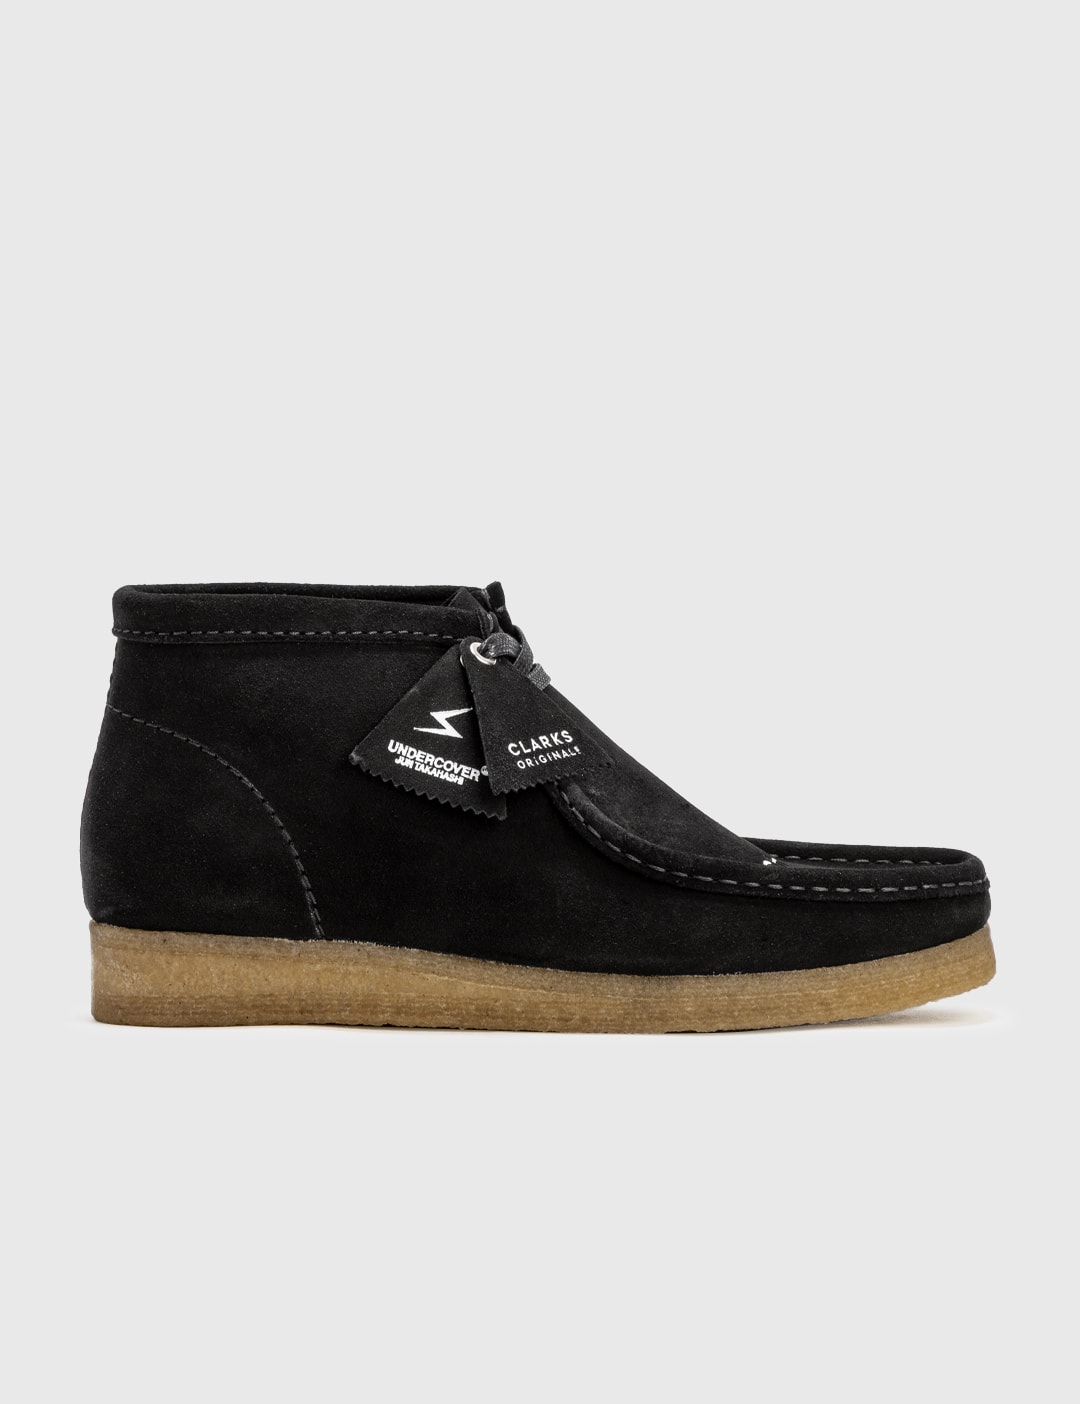 negativ nogle få besøg Undercover - Undercover x Clarks Wallabee Boots | HBX - Globally Curated  Fashion and Lifestyle by Hypebeast